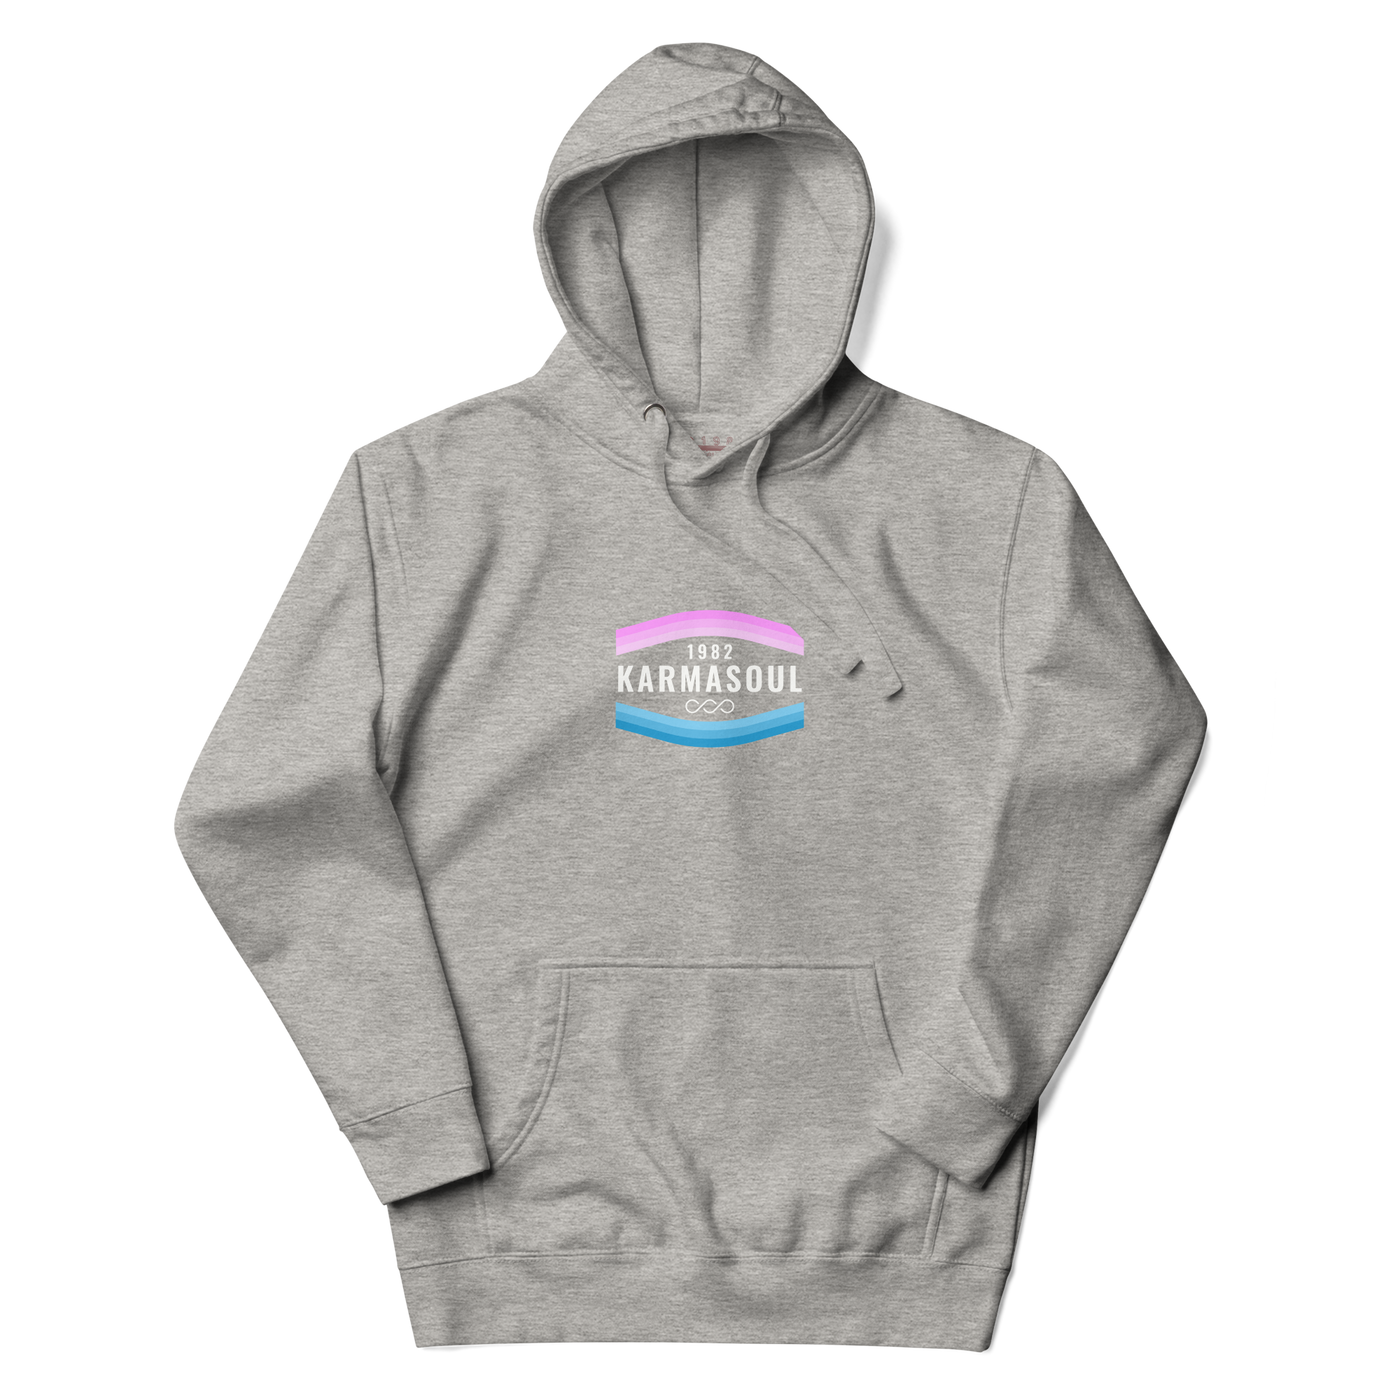 1982 Pinks and Blues Women's Hoodie